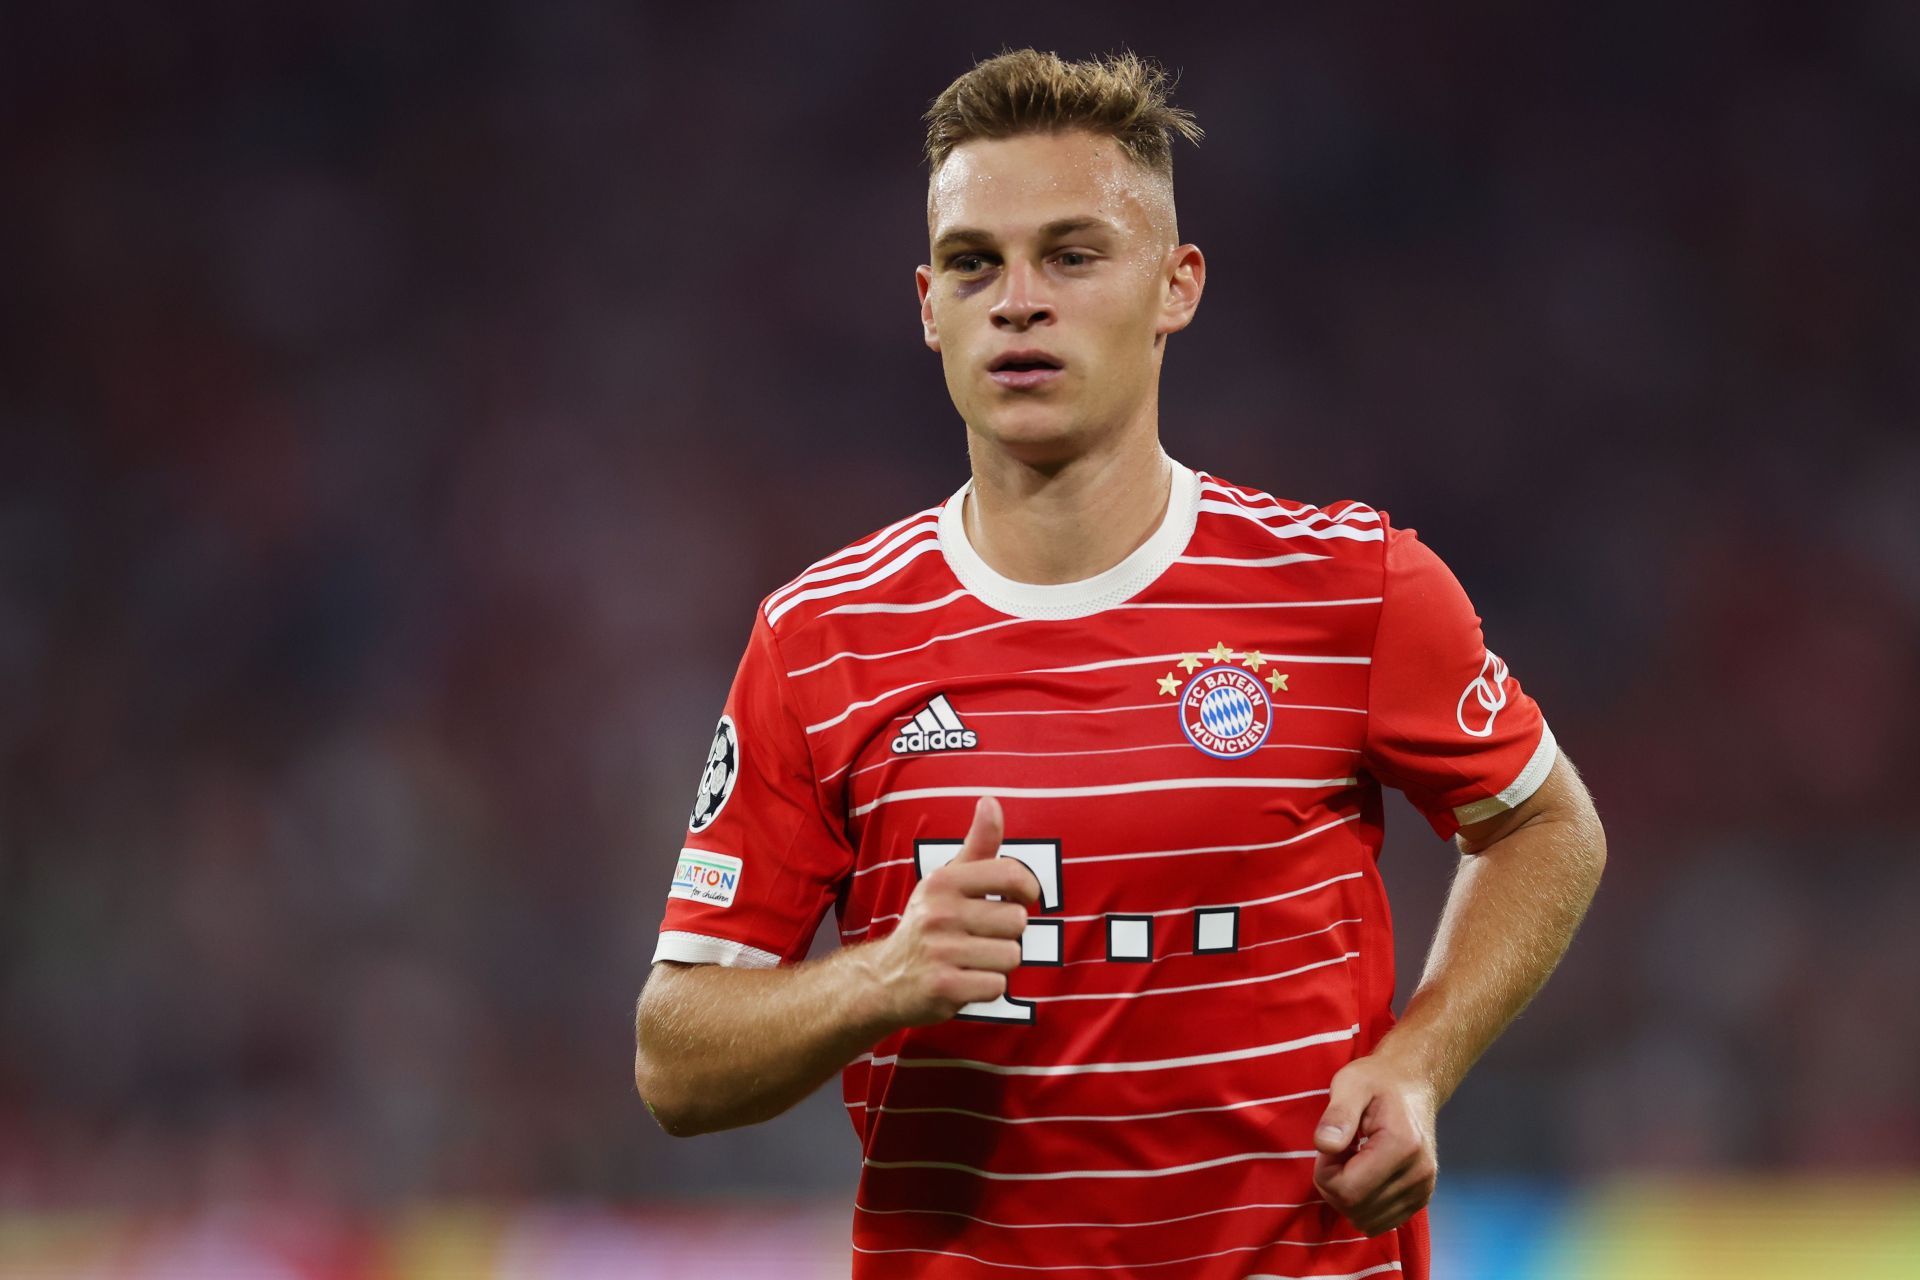 Joshua Kimmich is arguably the most versatile players on the planet